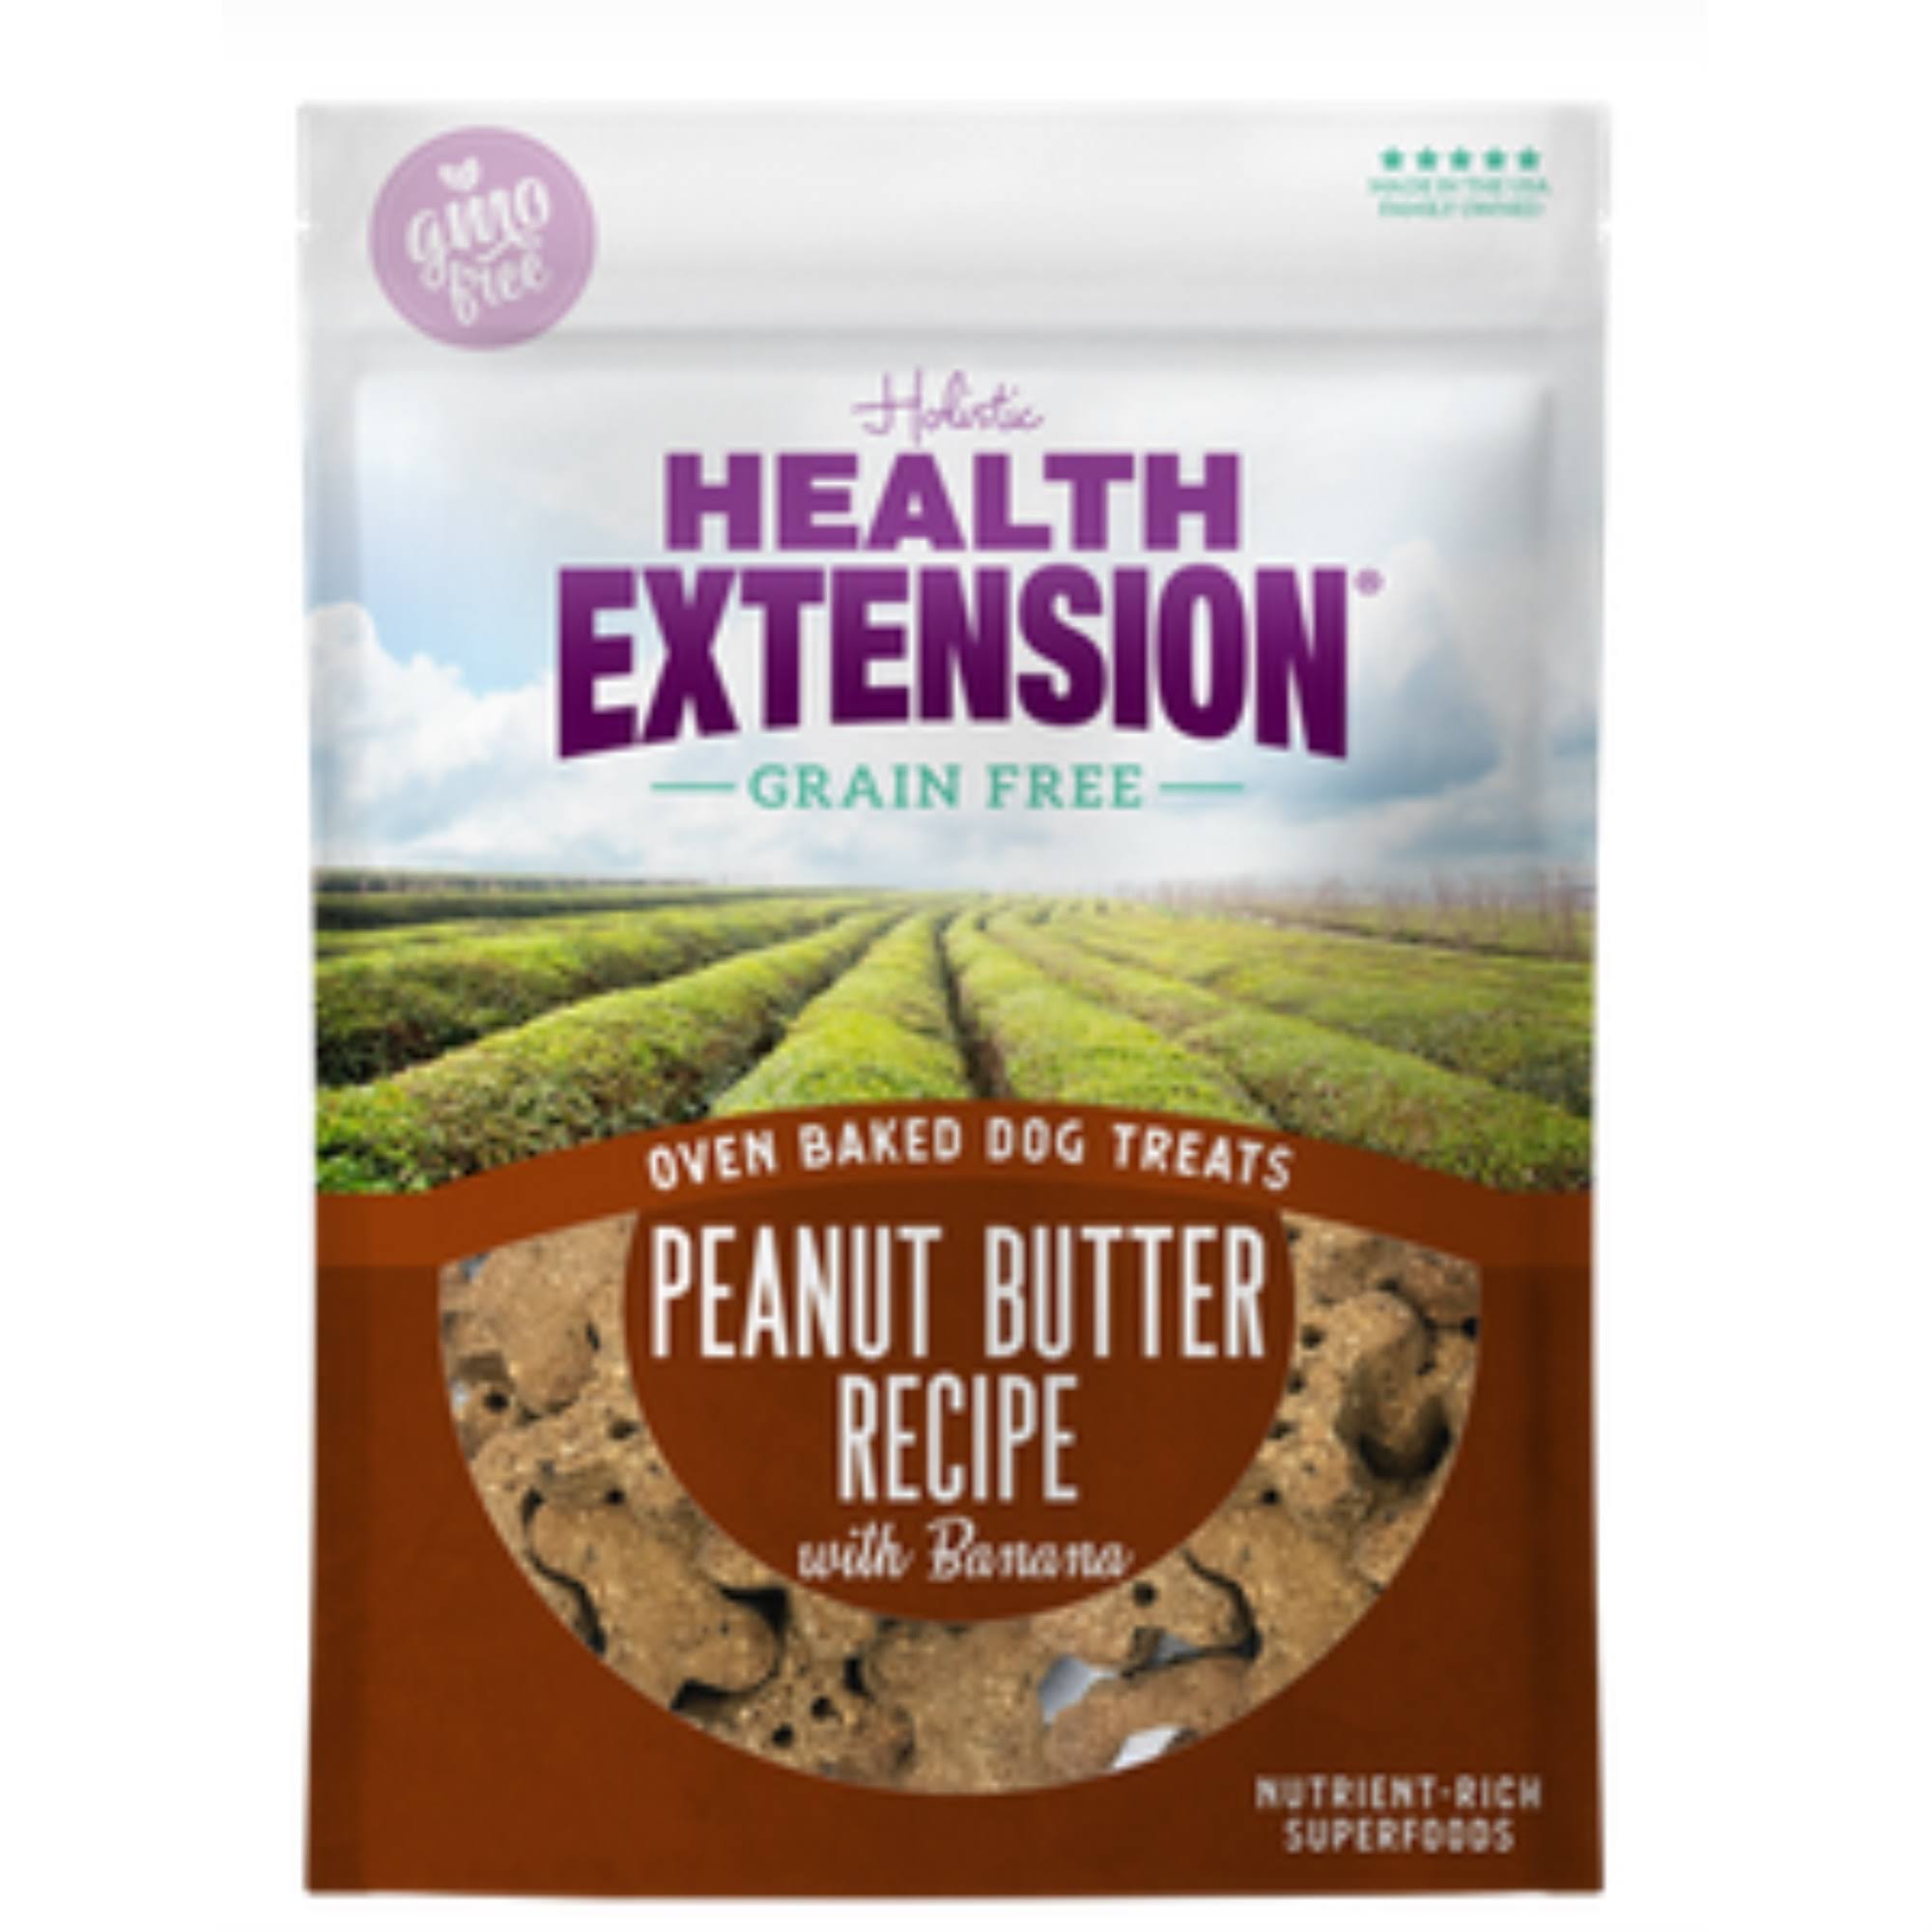 Health Extension Grain Free Oven Baked Peanut Butter Recipe with Banana Dog Treats 6oz